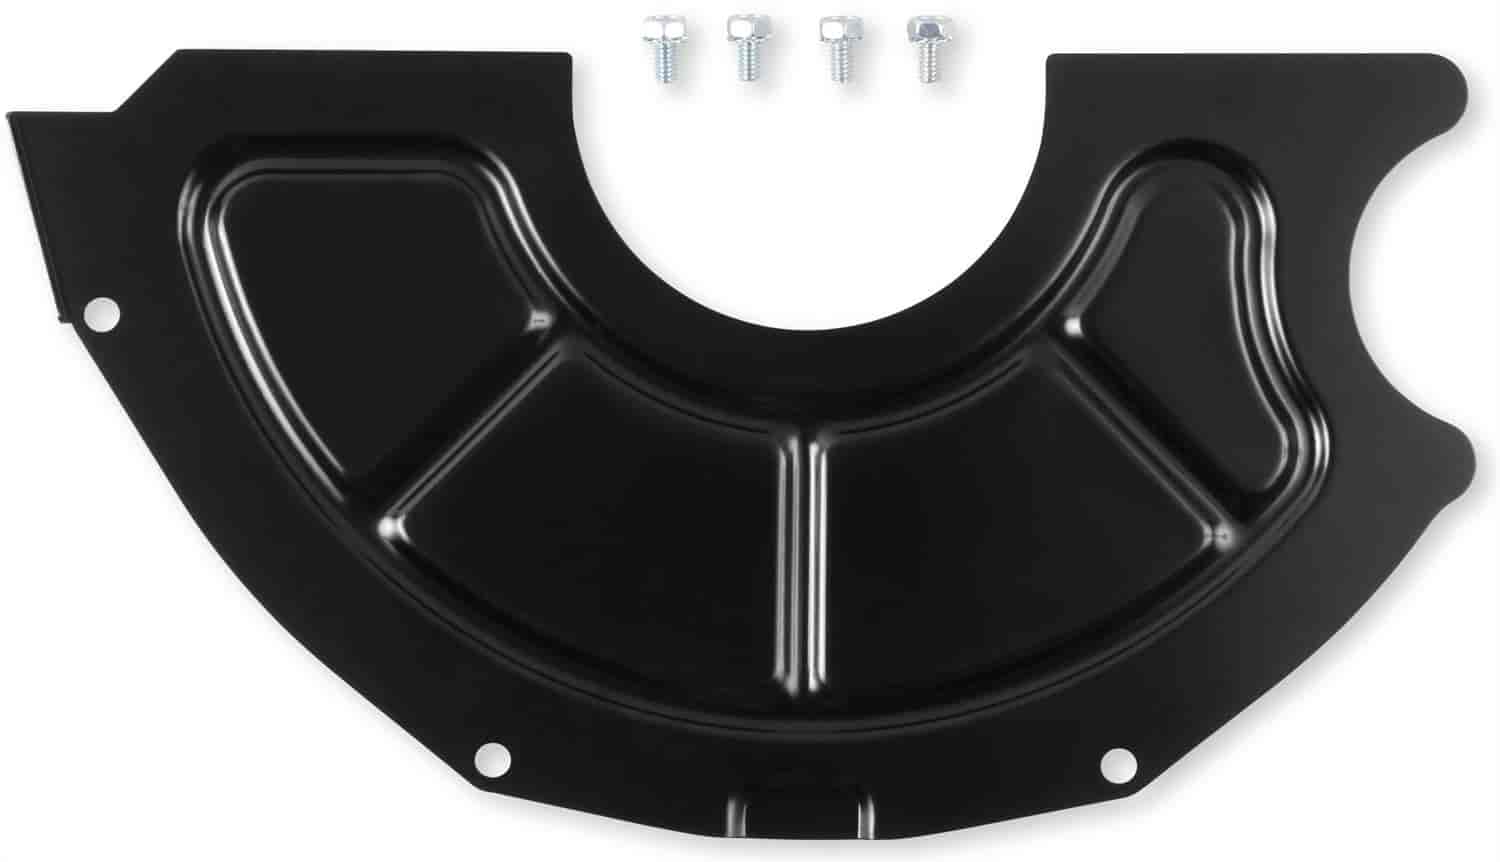 Inspection Cover fits Lakewood Cast-Aluminum Bellhousing LK4000 and LK4000L, Small Block Chevy and Big Block Chevy